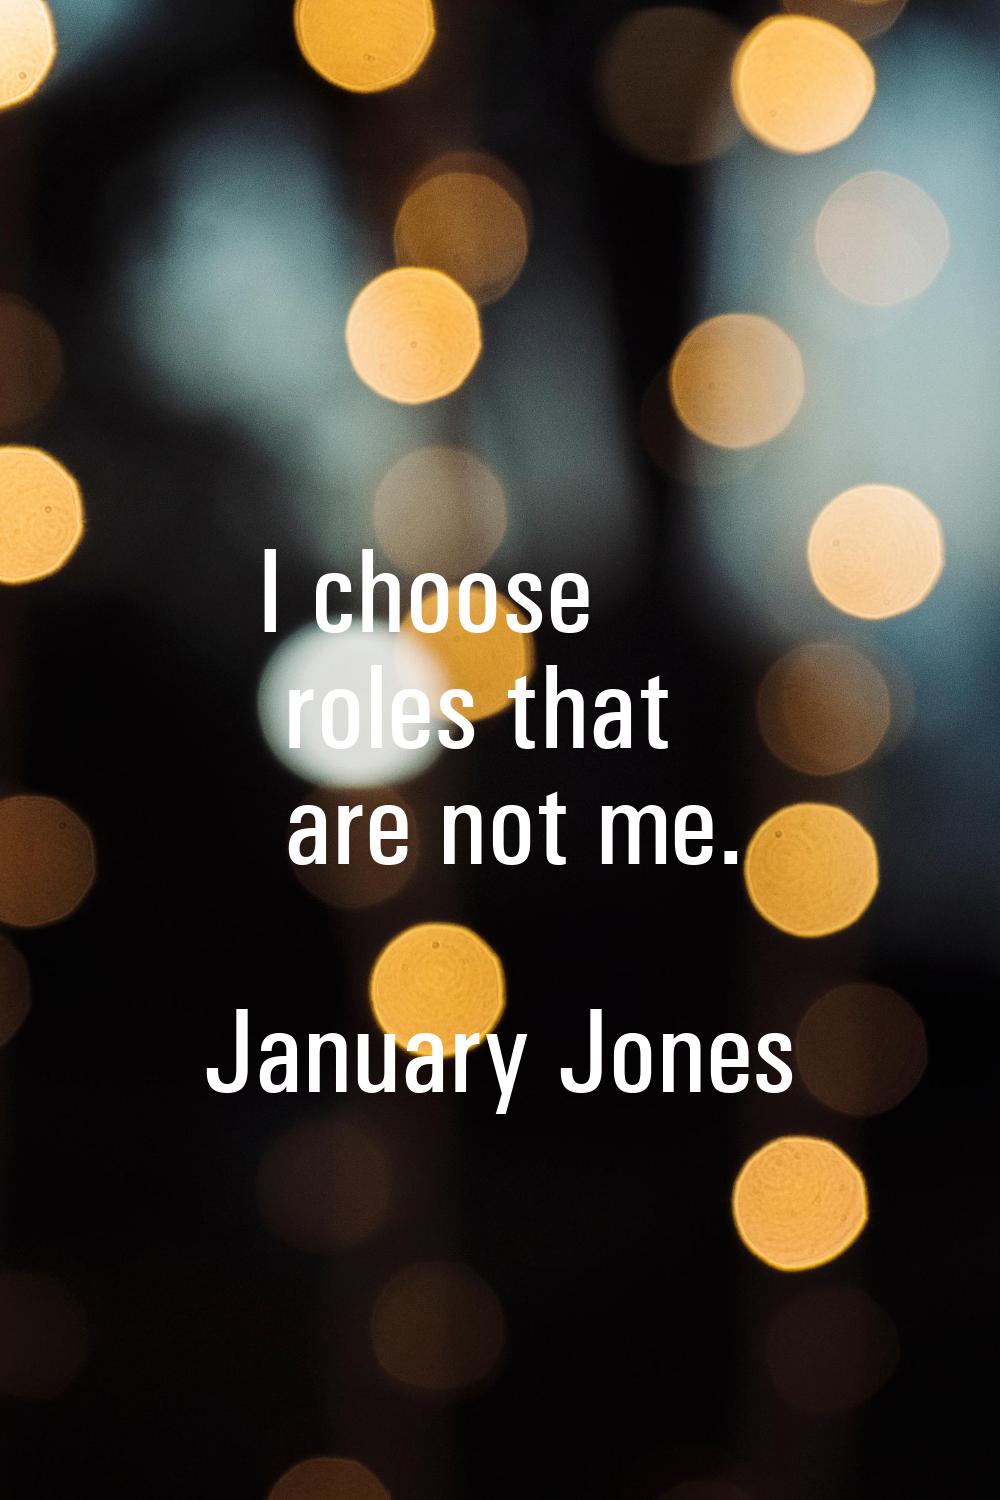 I choose roles that are not me.